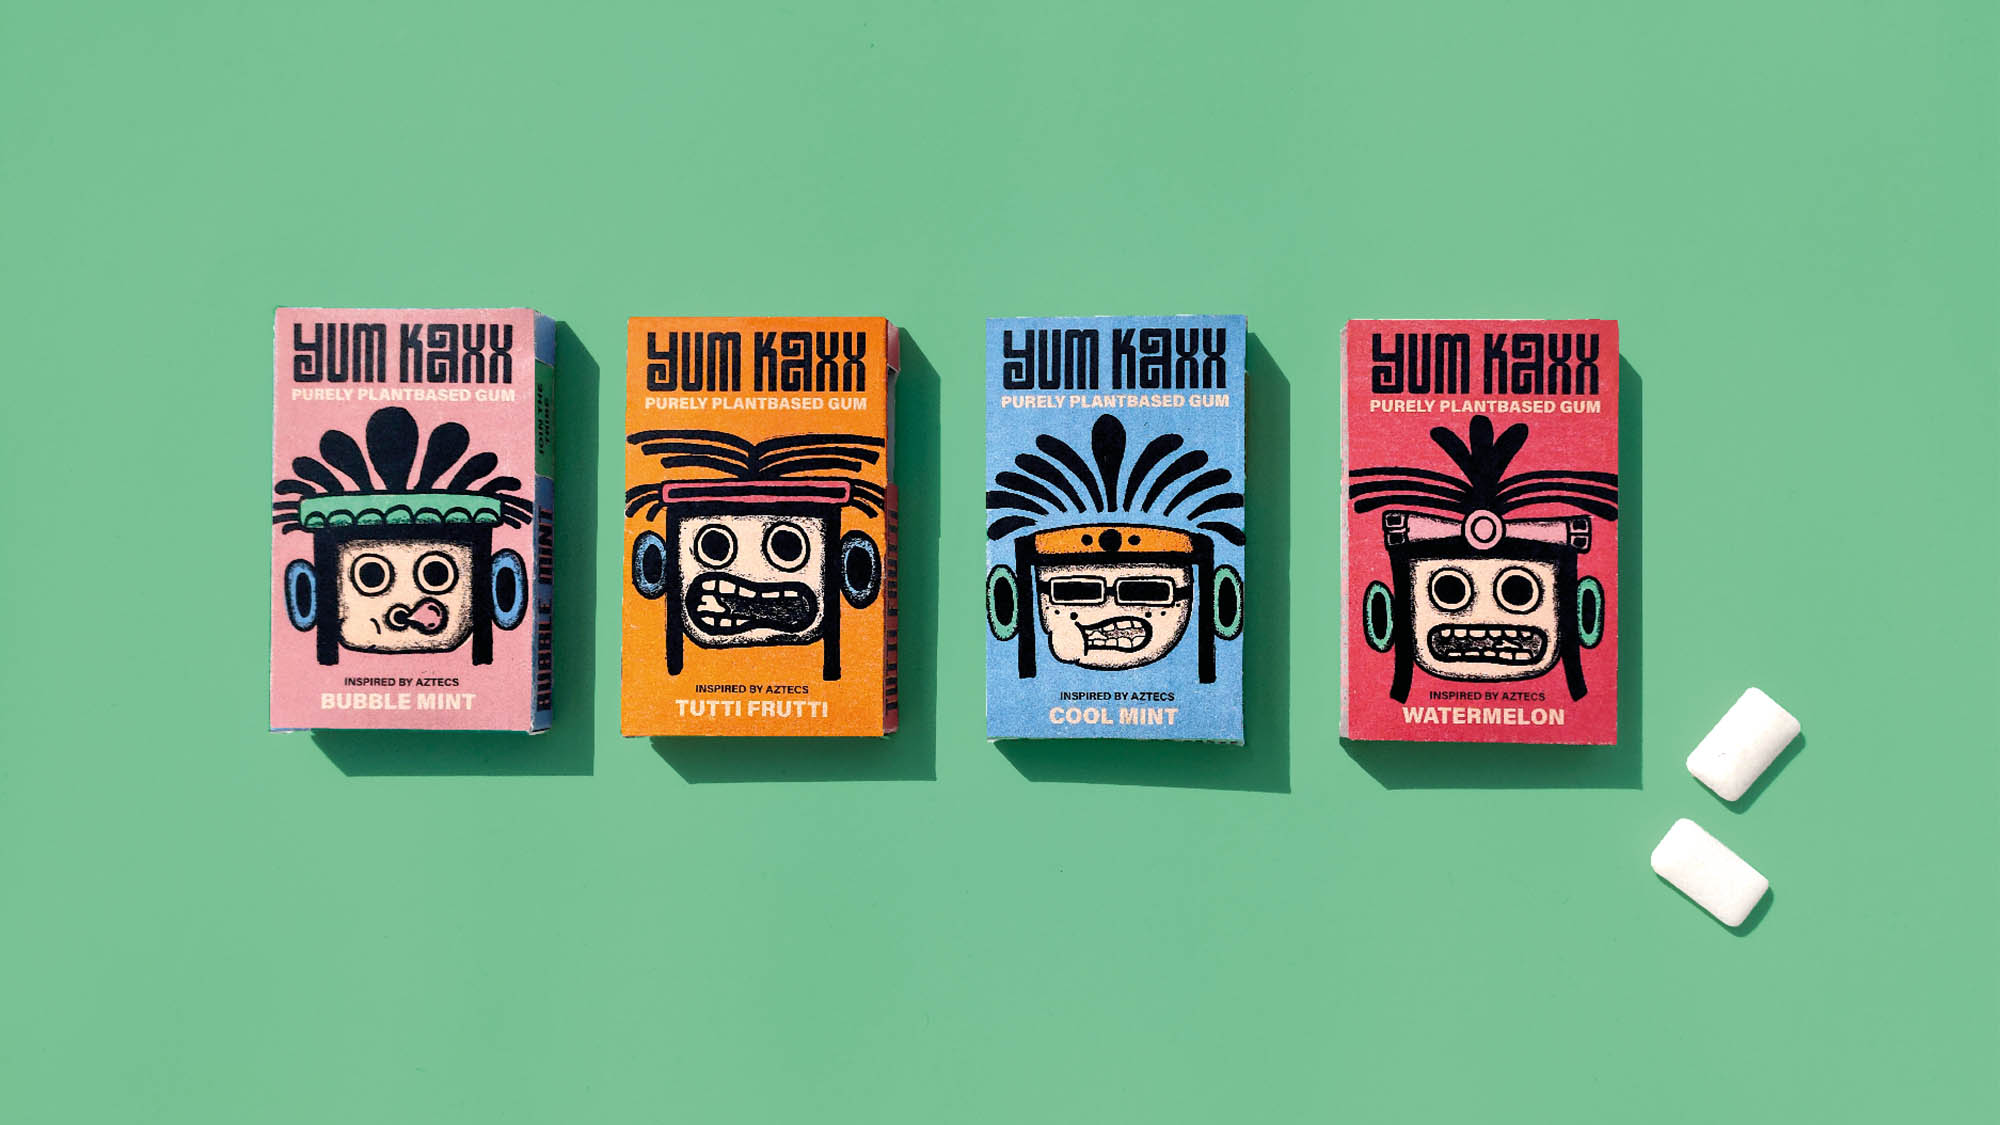 Graphic Design Work by Maisie Willis showing colourful chewing gum packaging. with character portraits on each flavour.